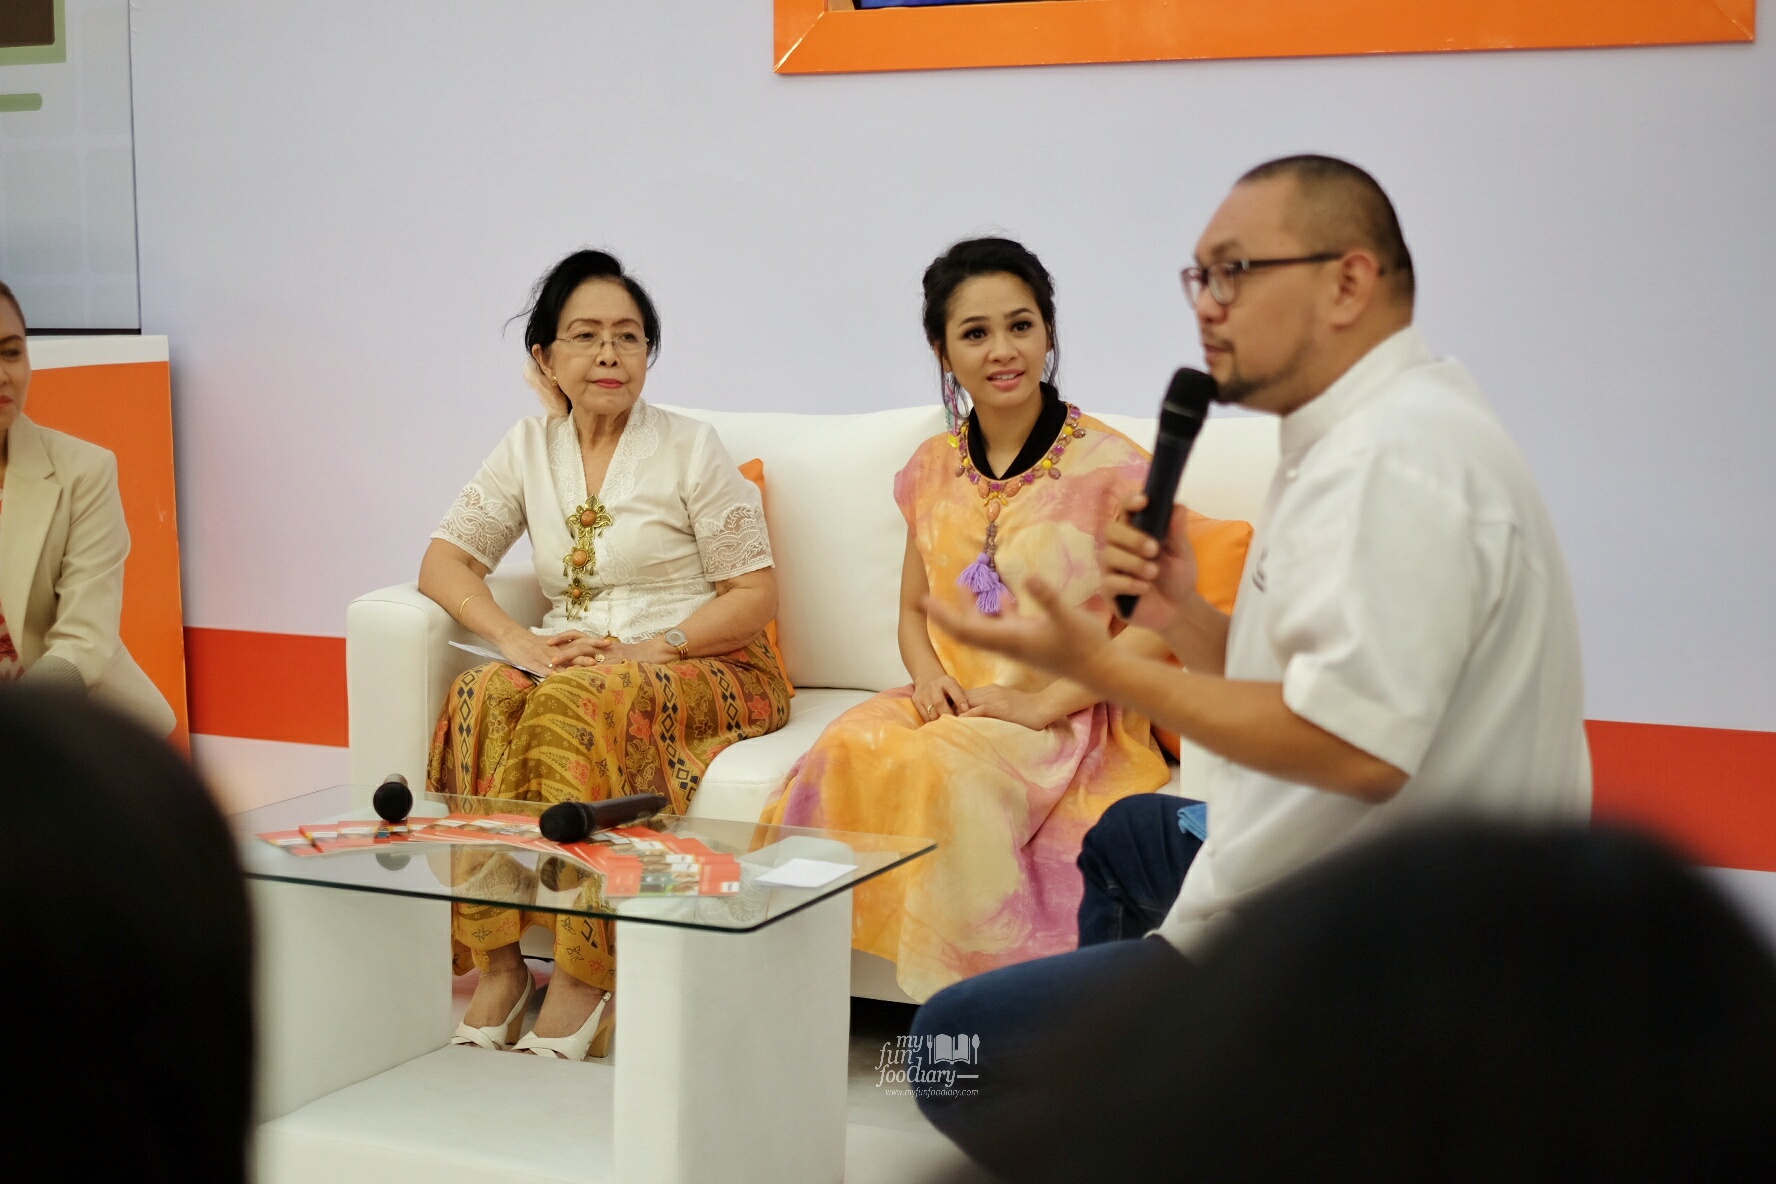 Chef Lucky for the talkshow at Panasonic Cooking by Myfunfoodiary